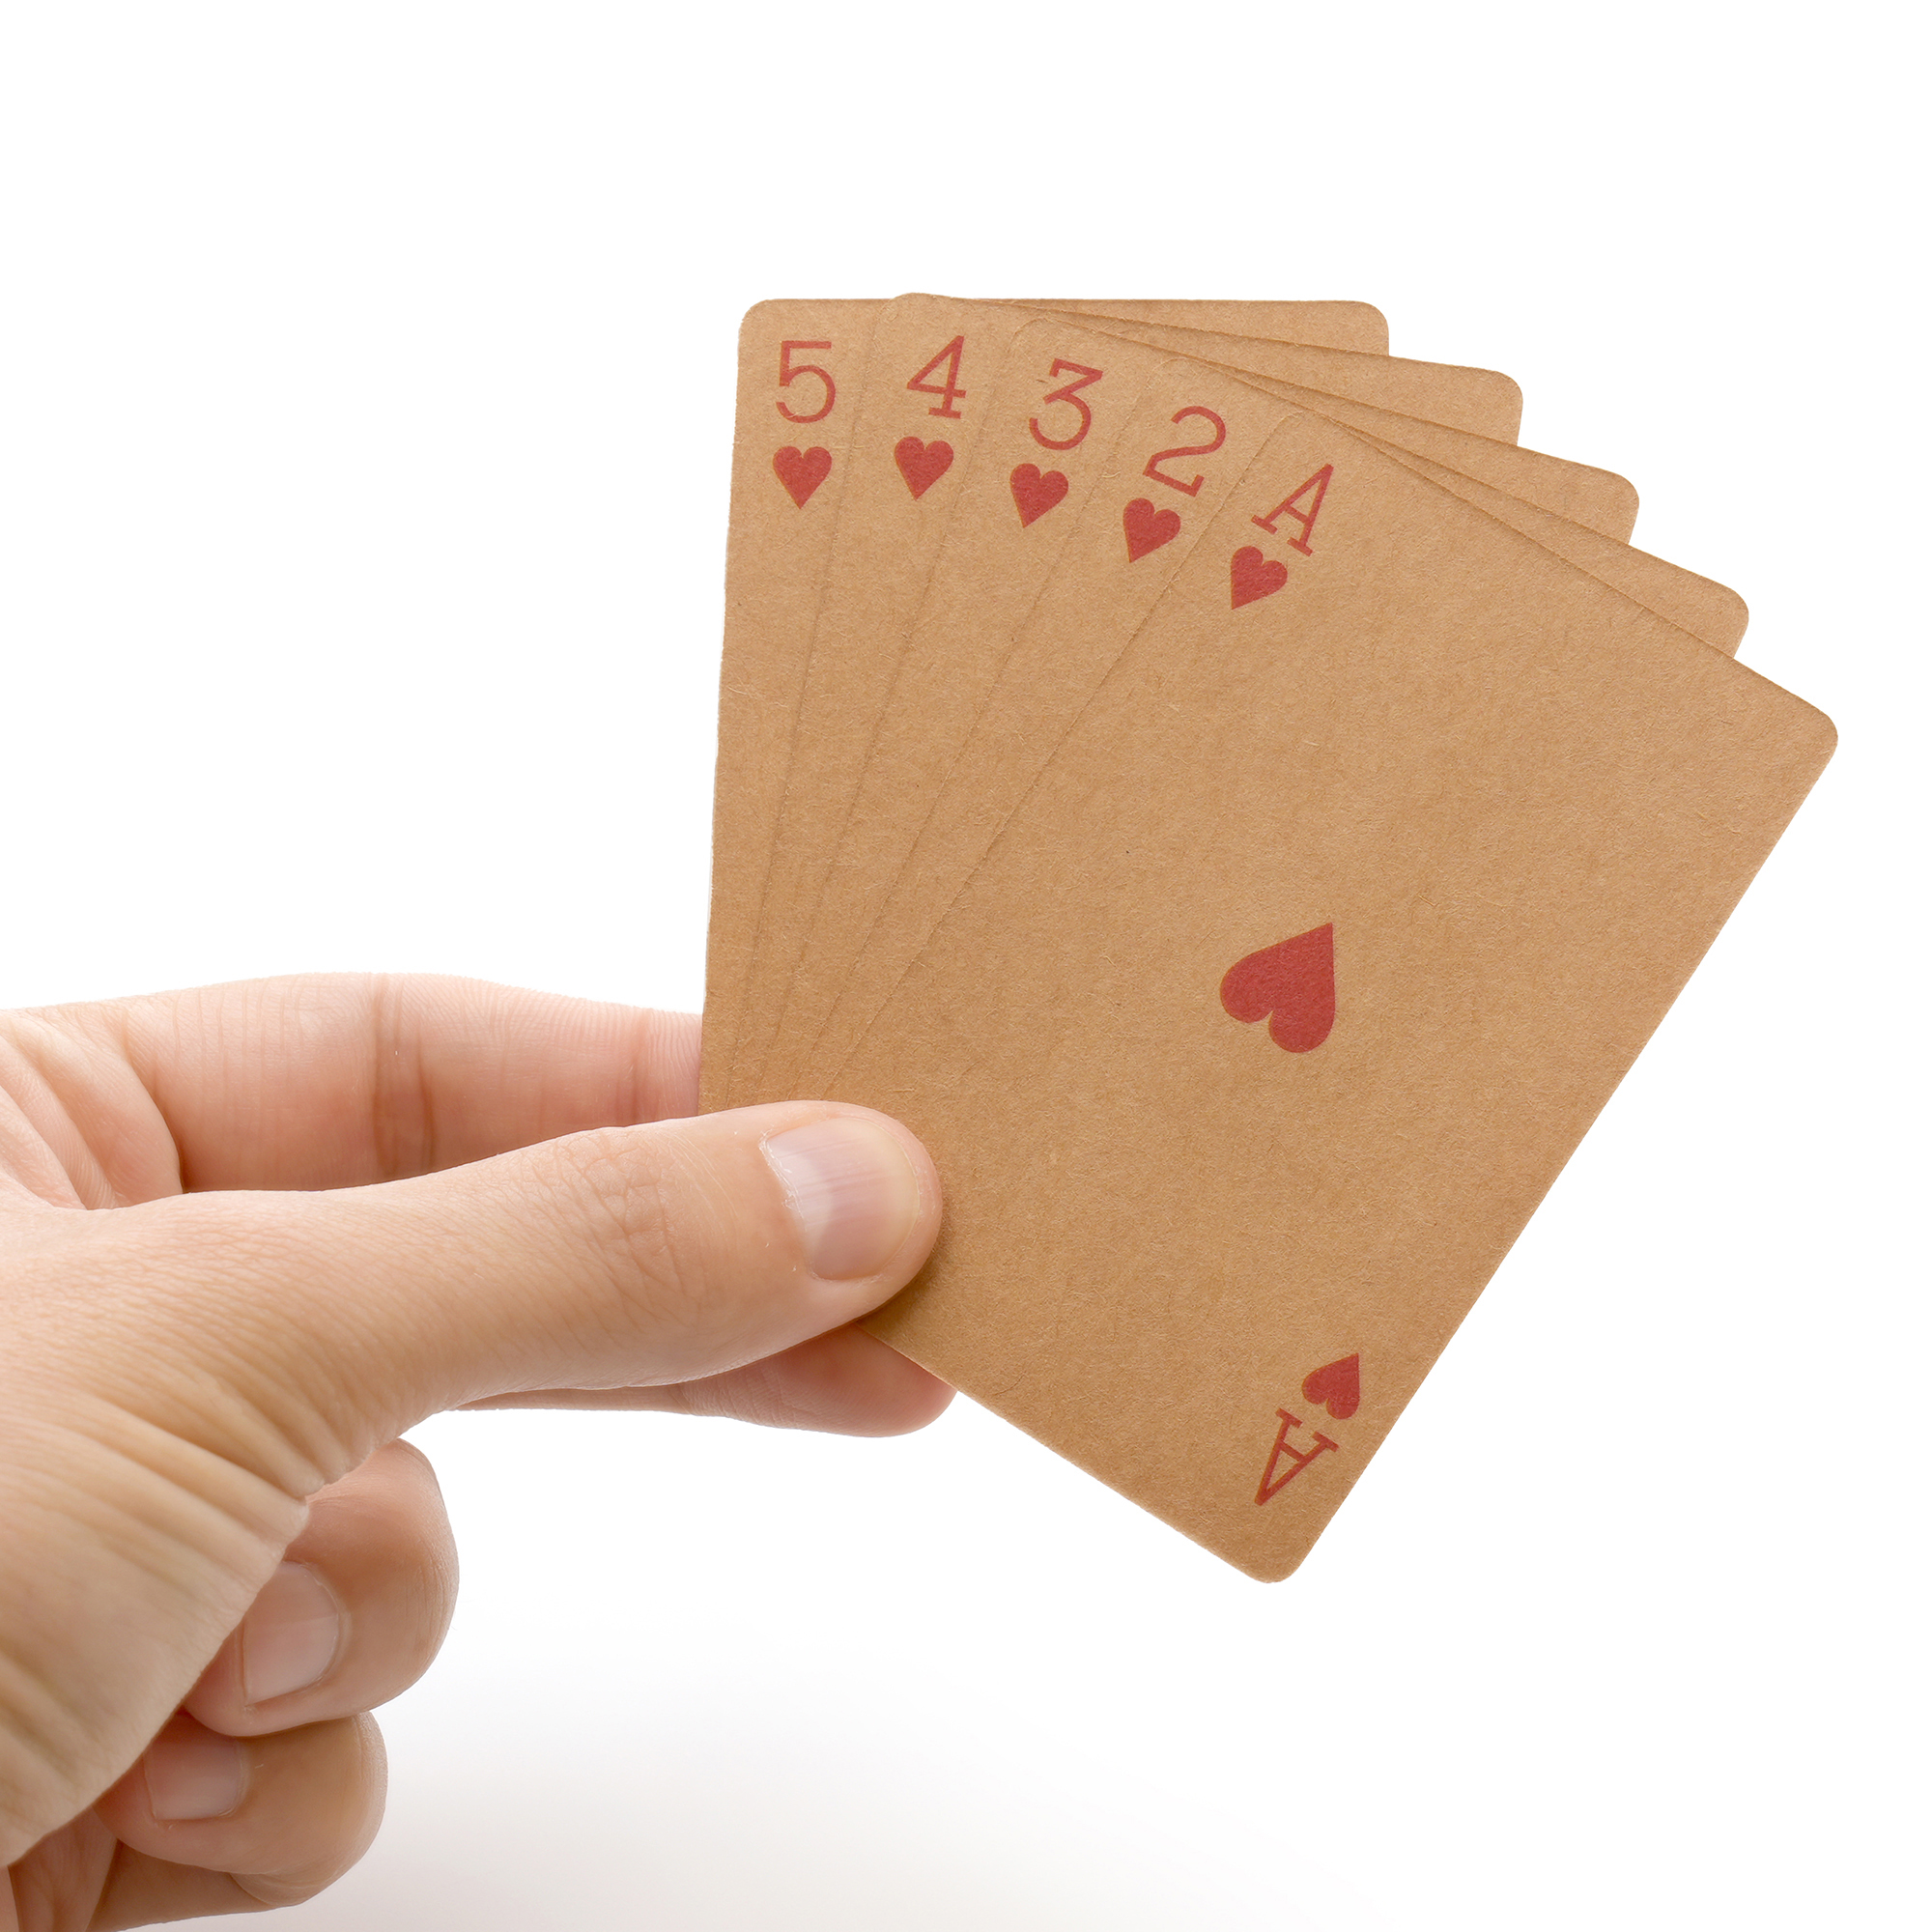 Deck of 54 classic 250gsm kraft paper playing cards housed in a brown cardboard box ready to print your company logo or have a full colour label. Playing cards cannot be personalised.